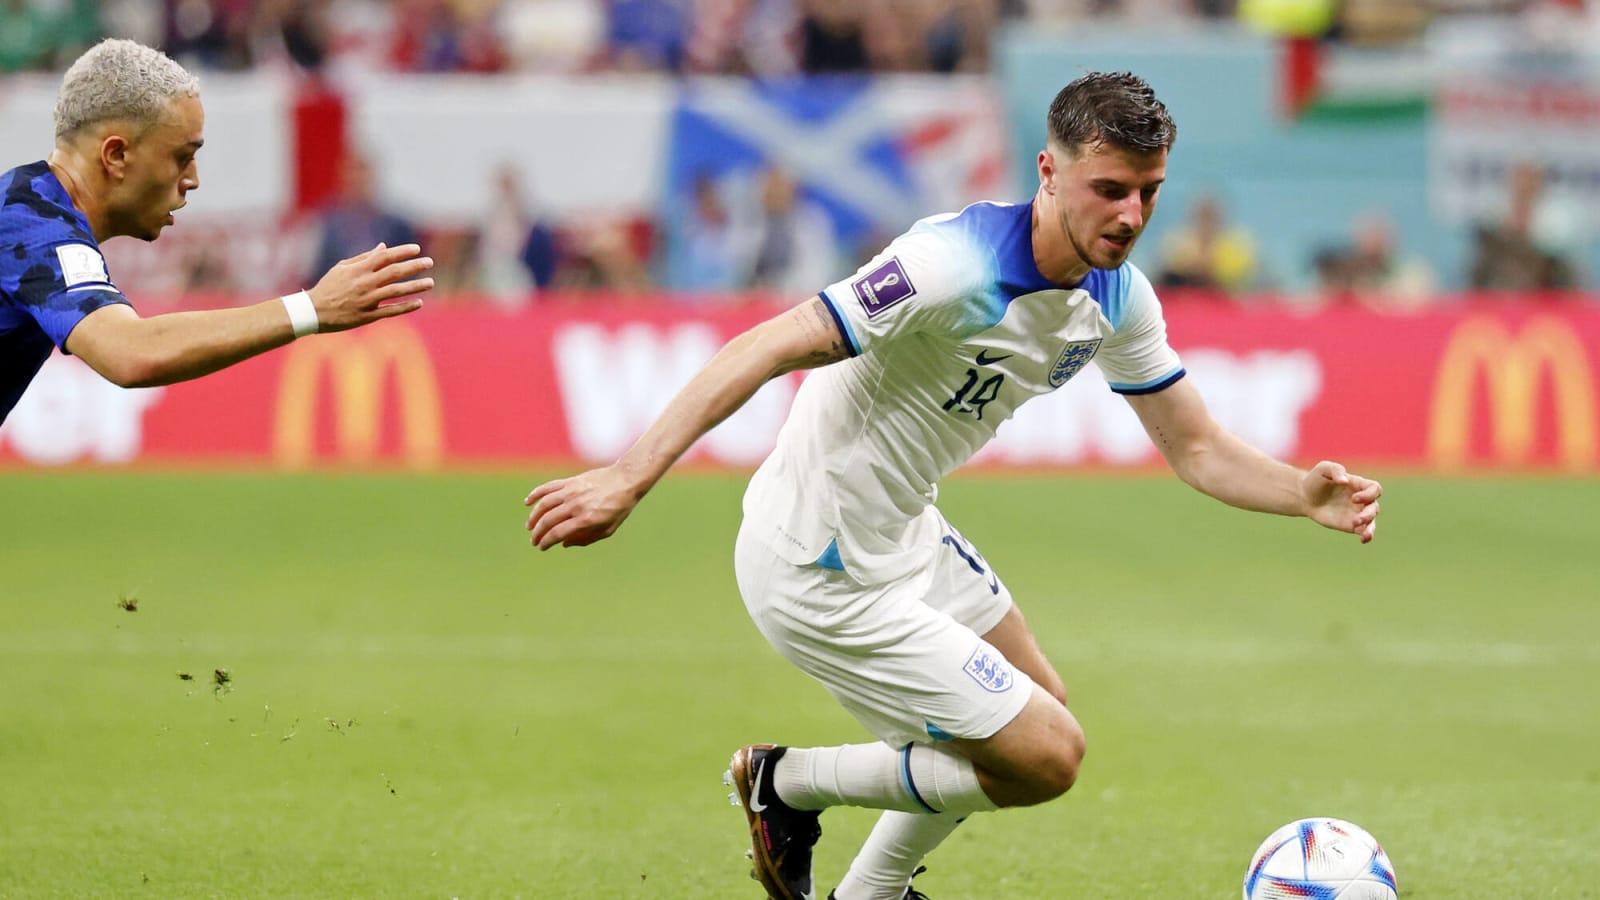 Mason Mount in contention to make squad for Liverpool clash